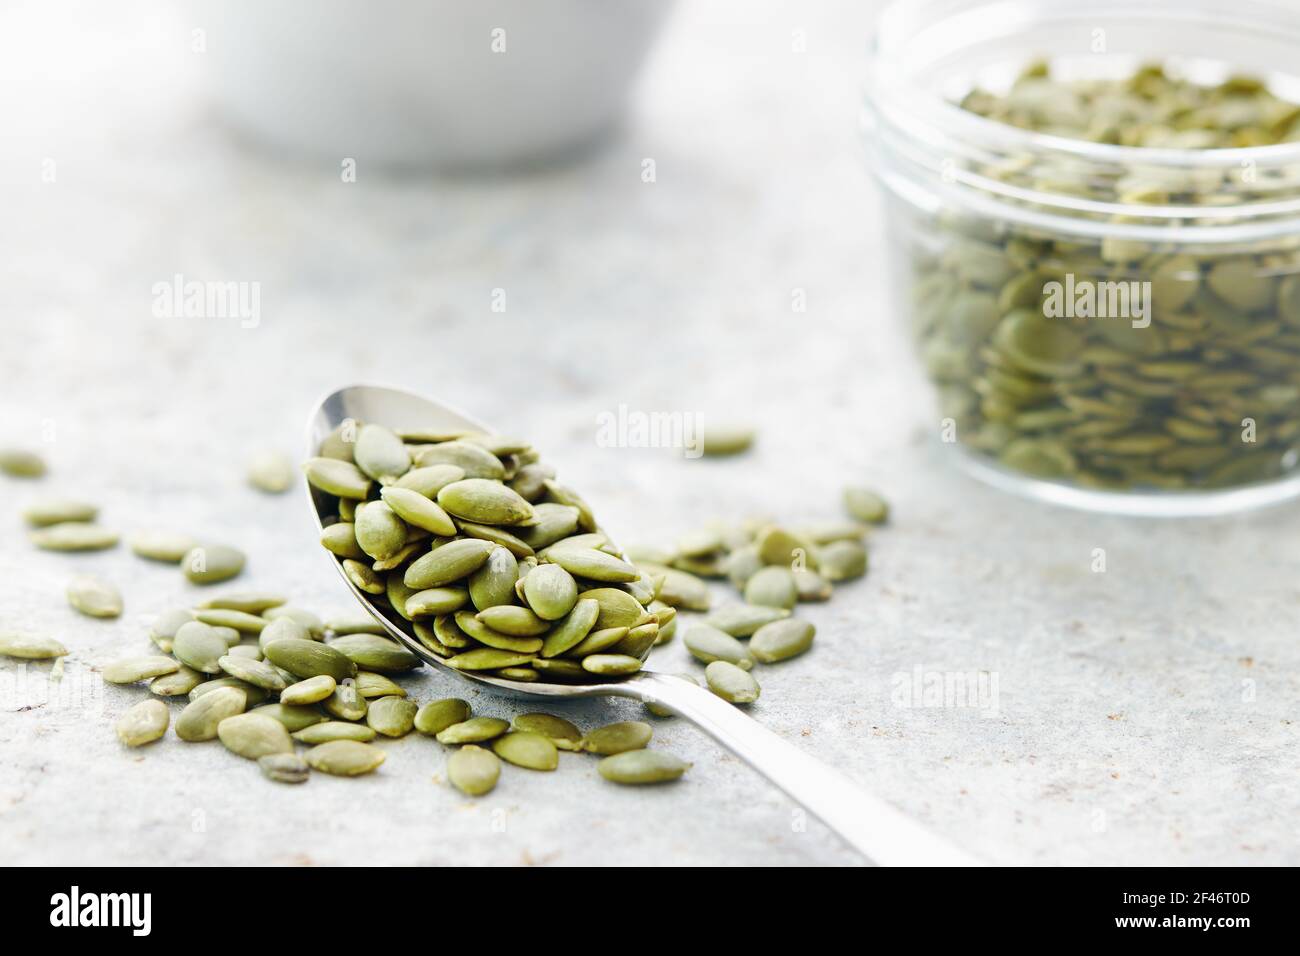 Pumpkin seeds on and beside spoon, close up Stock Photo